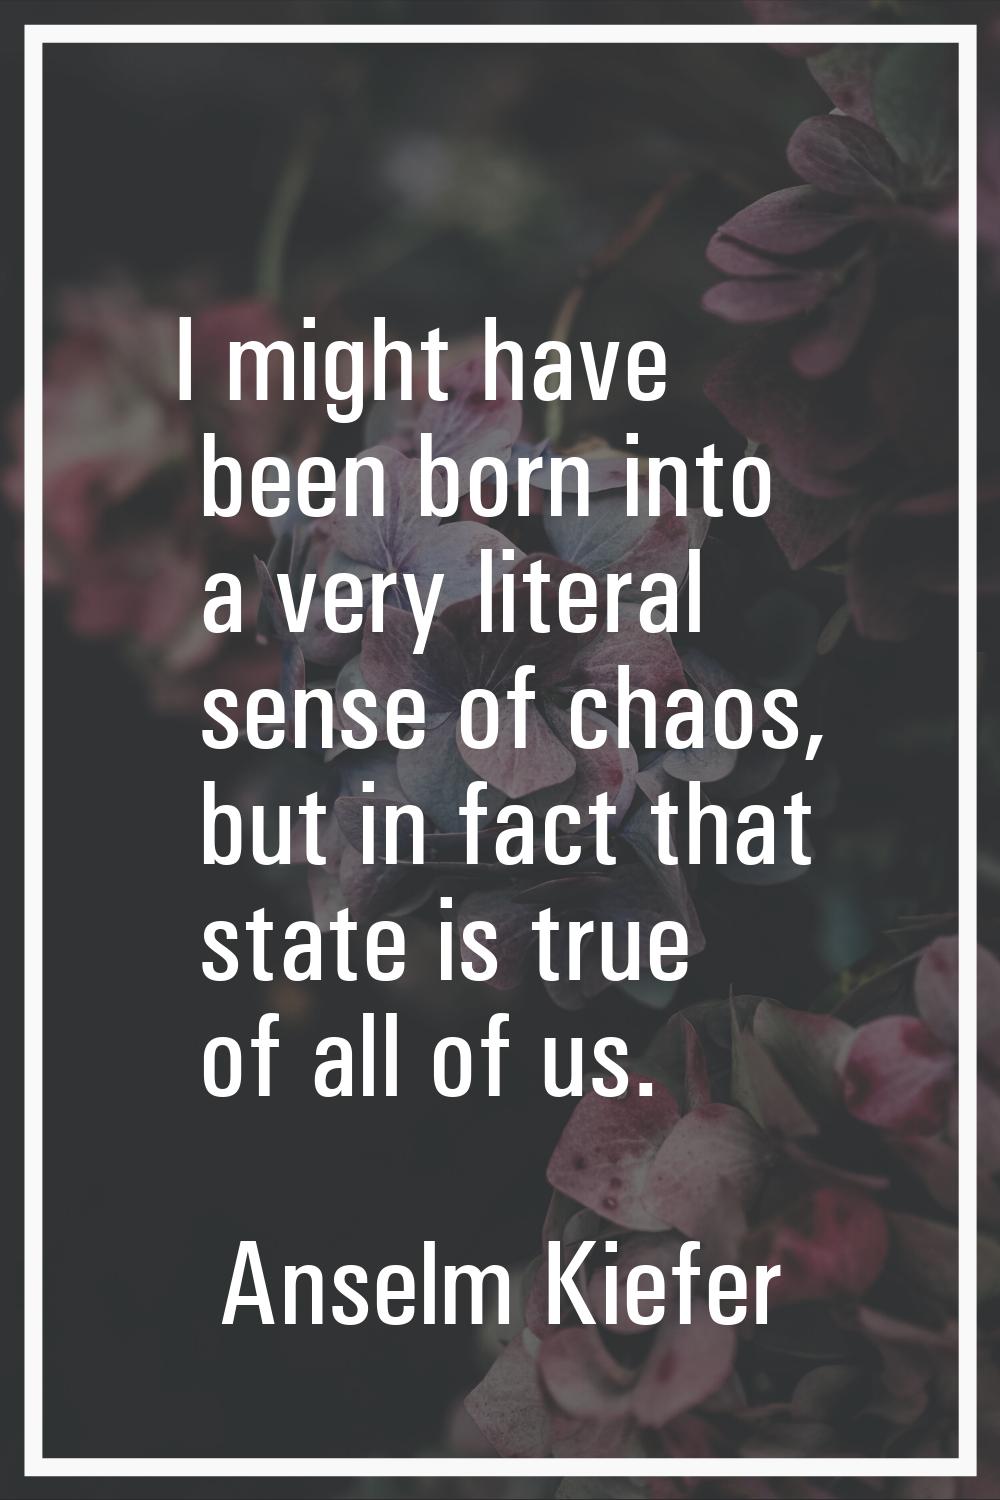 I might have been born into a very literal sense of chaos, but in fact that state is true of all of